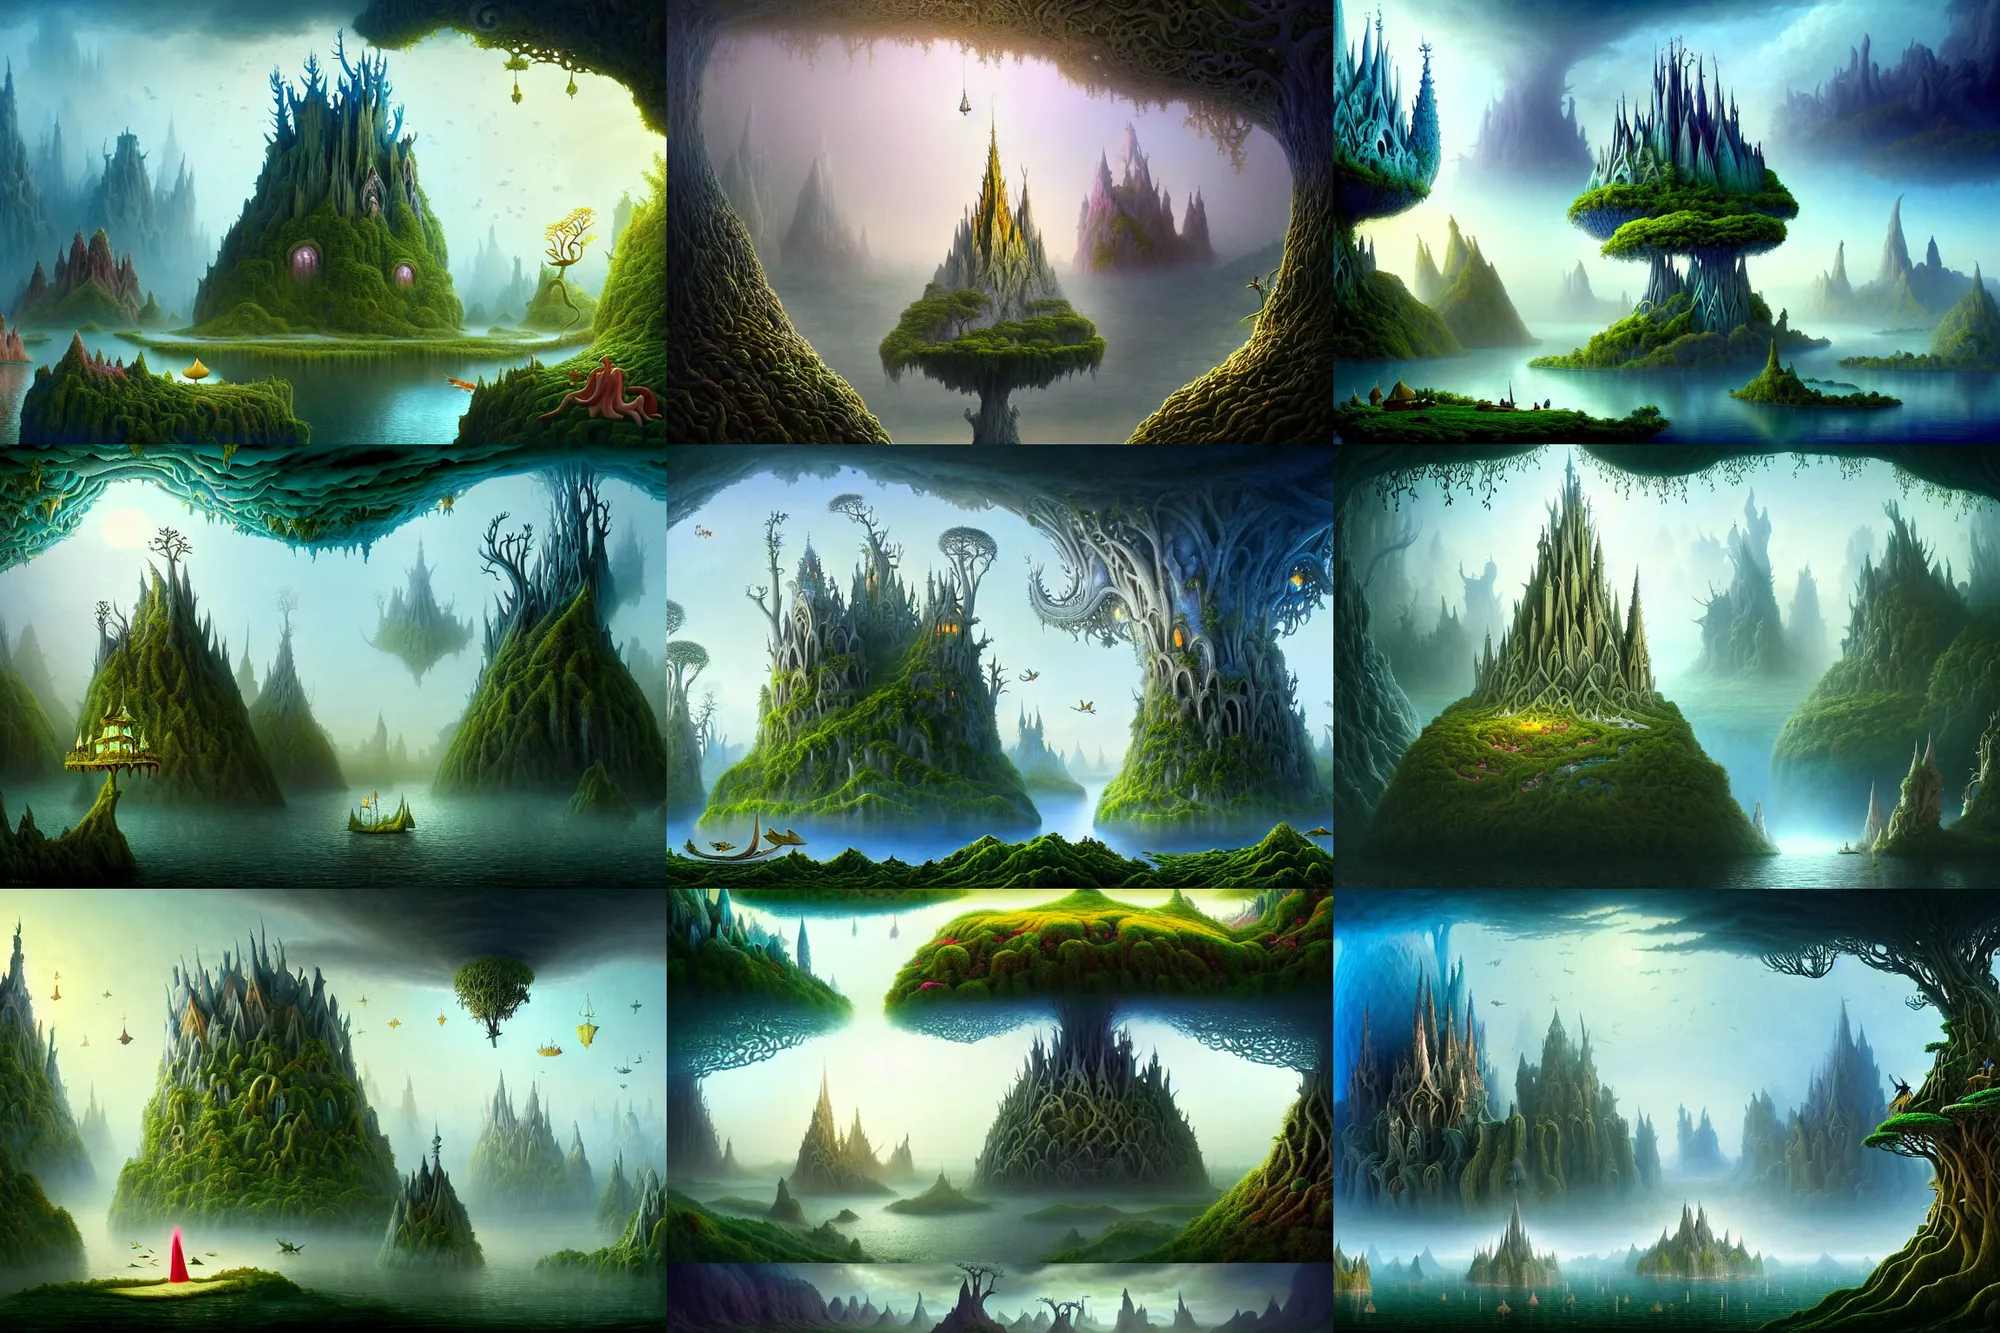 Prompt: an epic stunning beautiful and insanely detailed matte painting of magical floating tree islands in a dream world with surreal cathedral architecture designed by Heironymous Bosch, dream world populated with whimsical creatures, mega structures inspired by Heironymous Bosch's Garden of Earthly Delights, vast surreal landscape and horizon by Asher Durand and Cyril Rolando and Andrew Ferez, masterpiece!!!, grand!, imaginative!!!, whimsical!!, epic scale, intricate details, sense of awe, elite, wonder, insanely complex, masterful composition!!!, sharp focus, fantasy realism, dramatic lighting